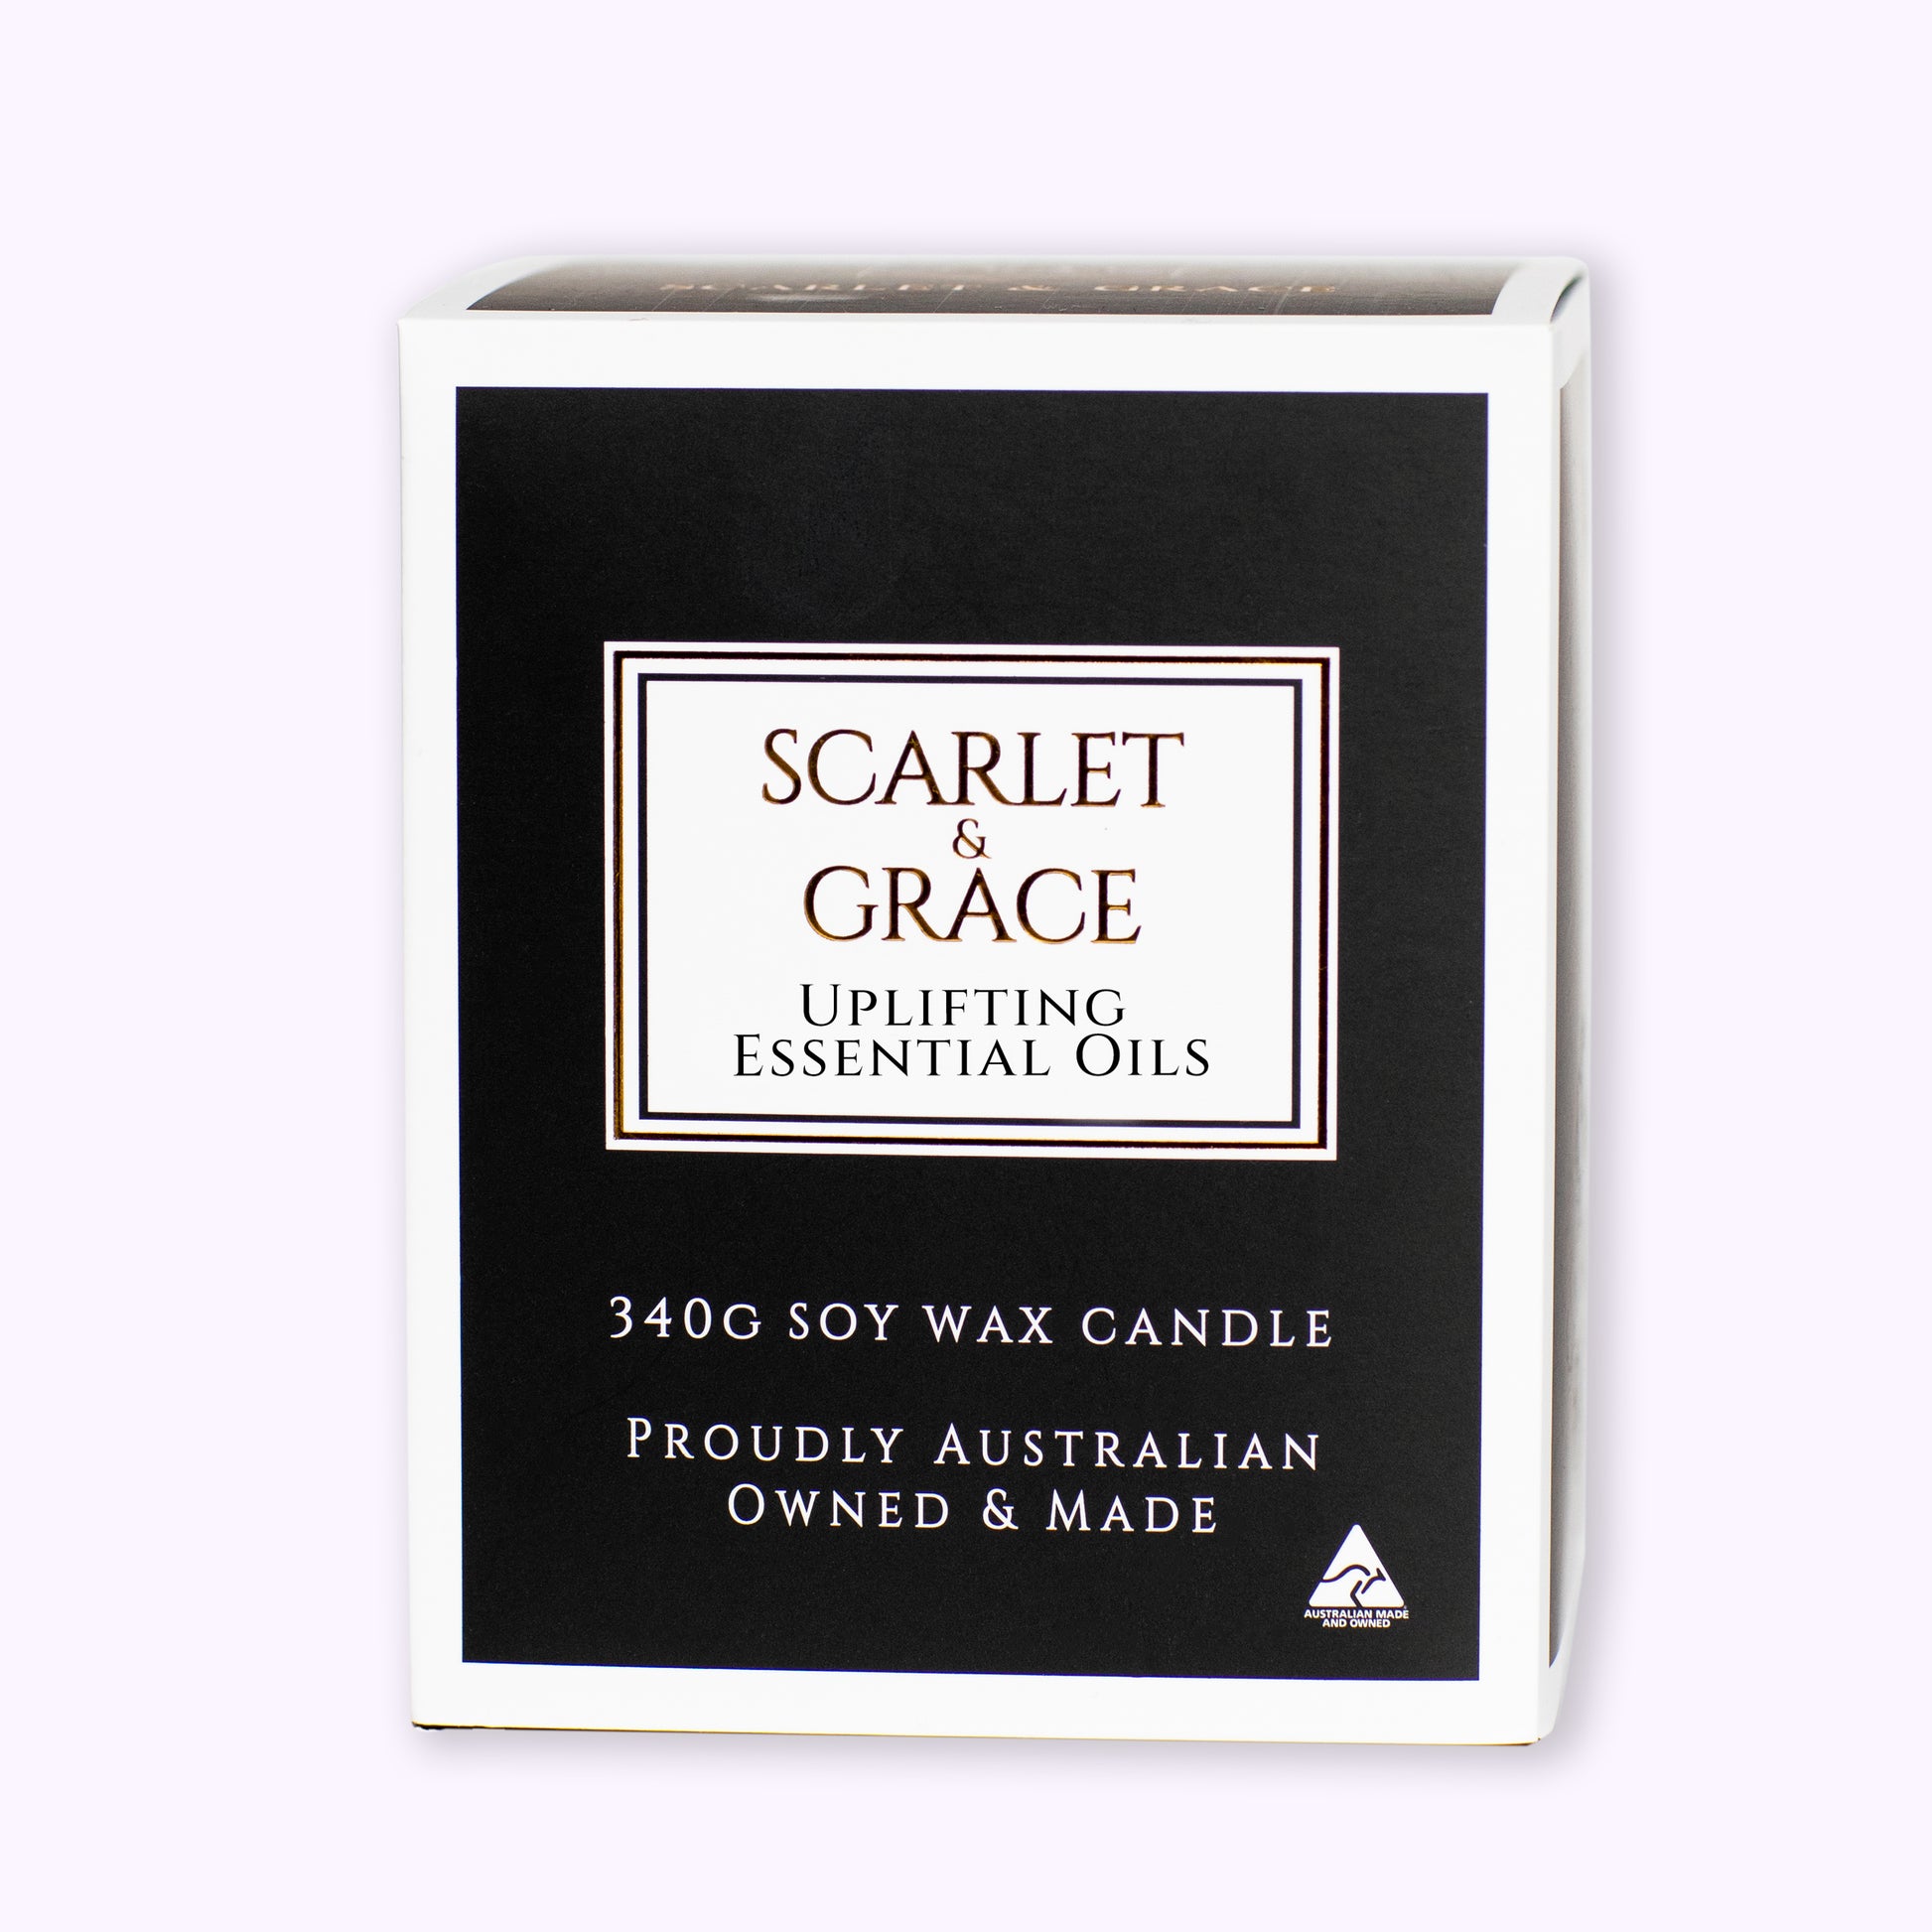 Uplifting Essential Oils - 340gm Soy Wax Candle - Scarlet & Grace